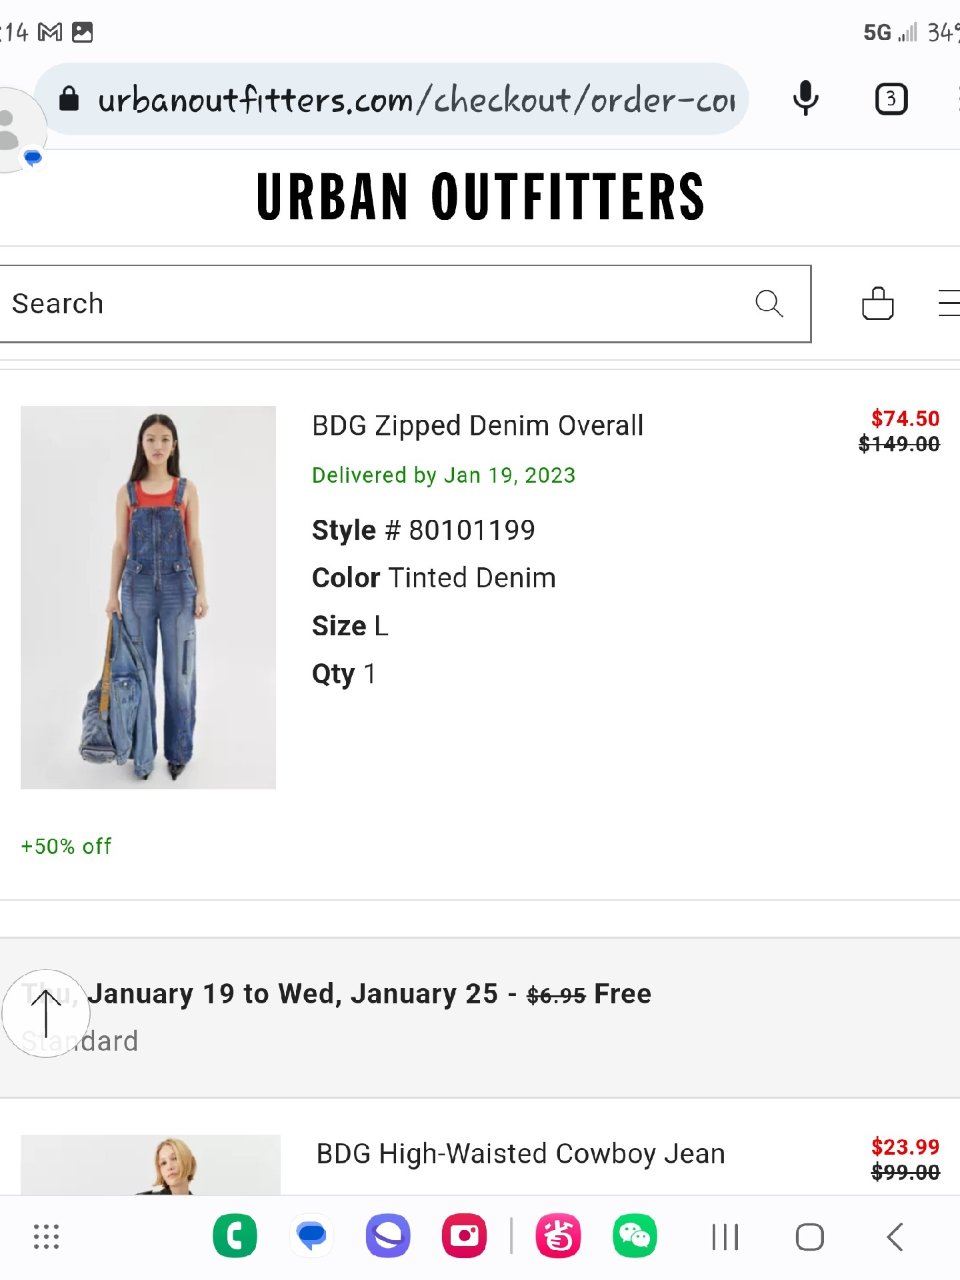 Urban outfitters 